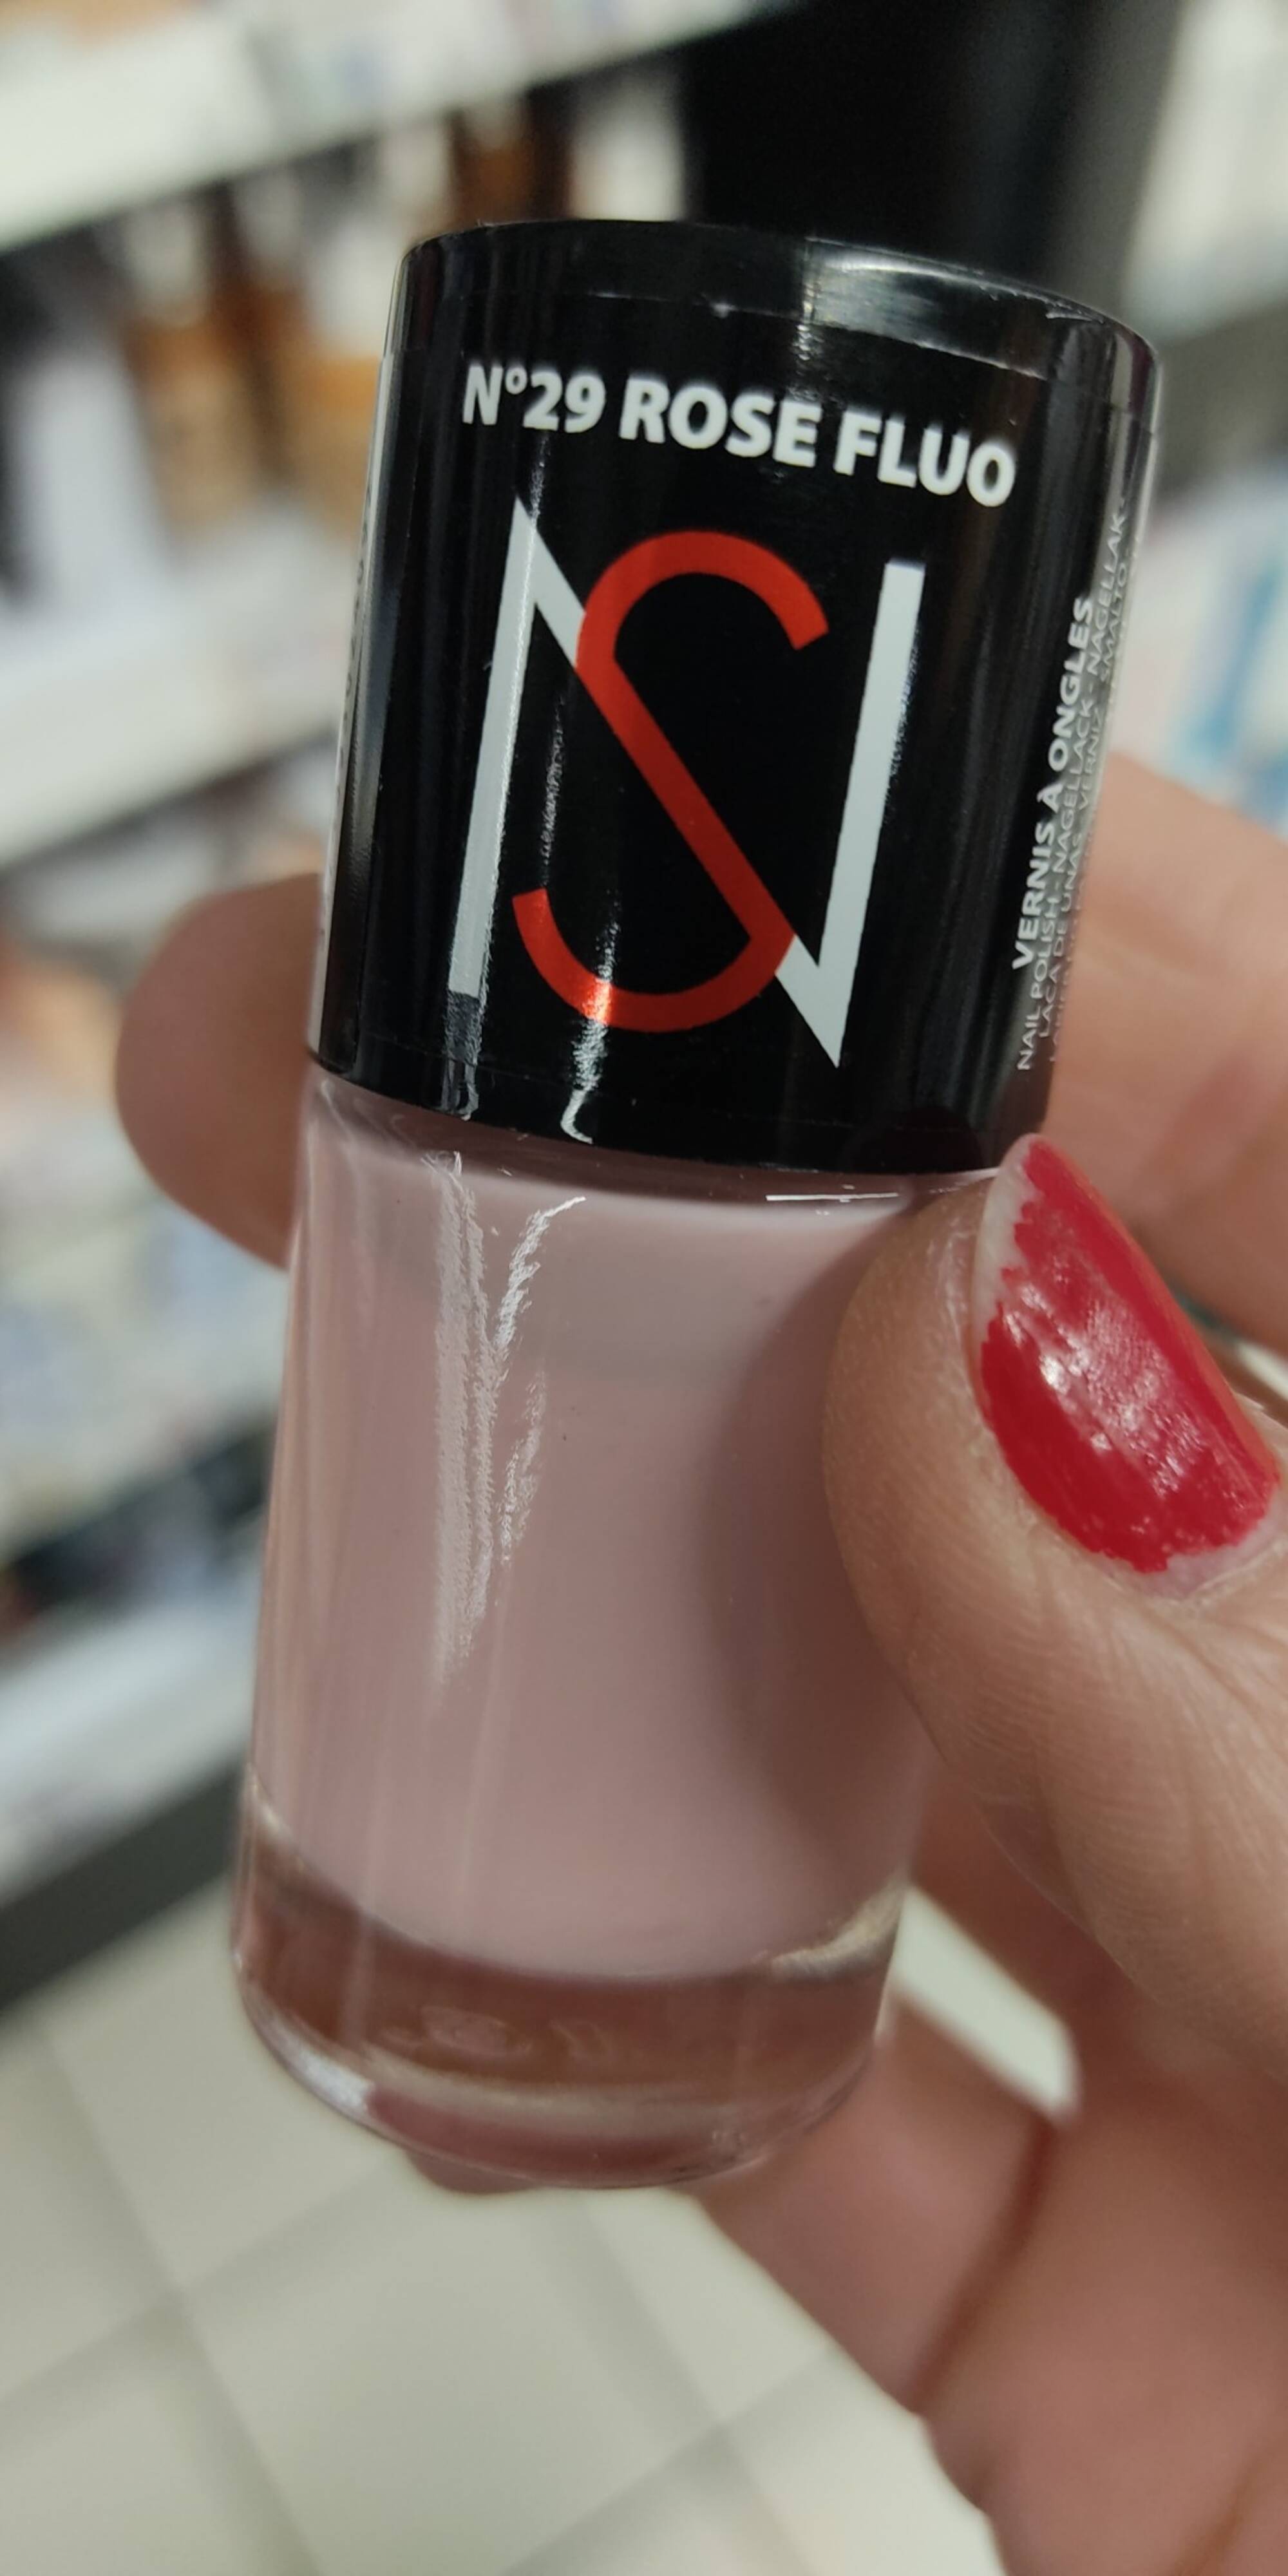 EUROP COSMETICS - Vernis à ongles n°29 rose fluo